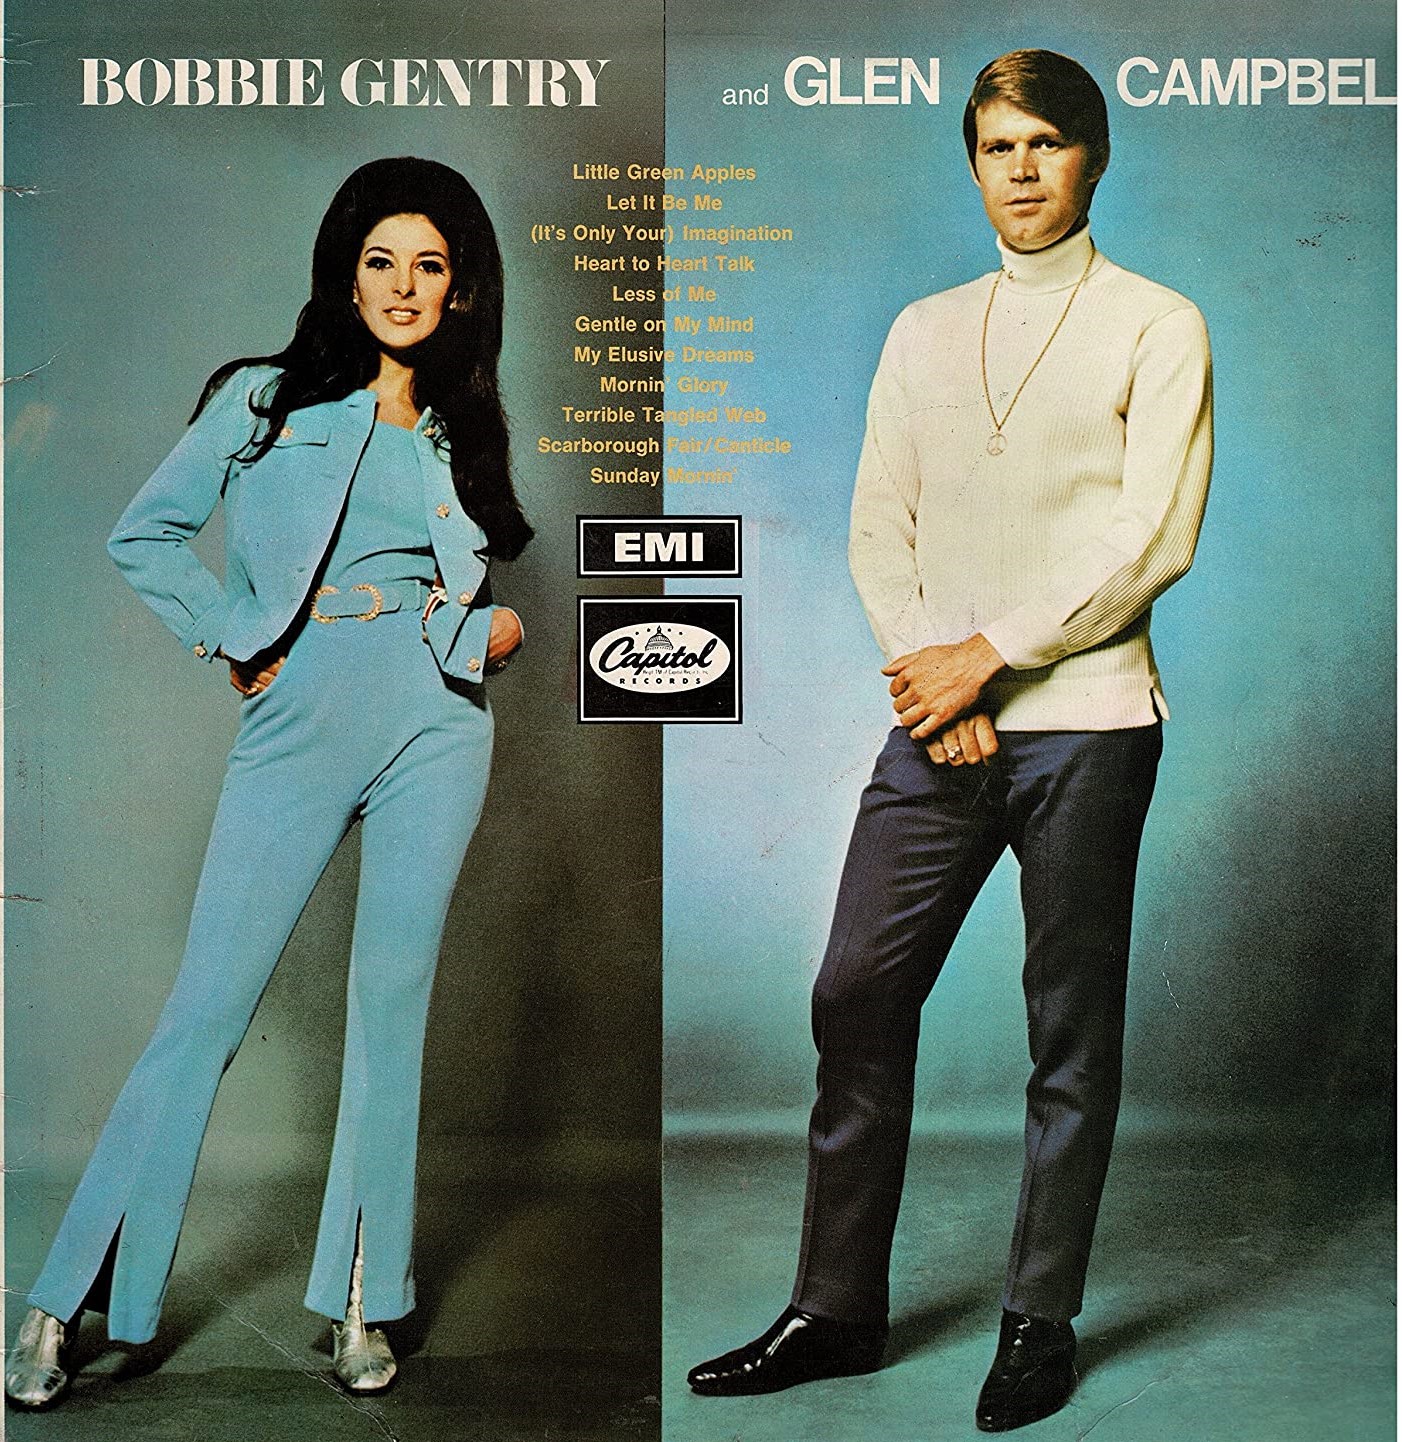 Glen Campbell Oldies Music Lyrics | Does this 1970 duet with Bobby Gentry  "outshine" the original Classic "All I Have To Do Is Dream"?    